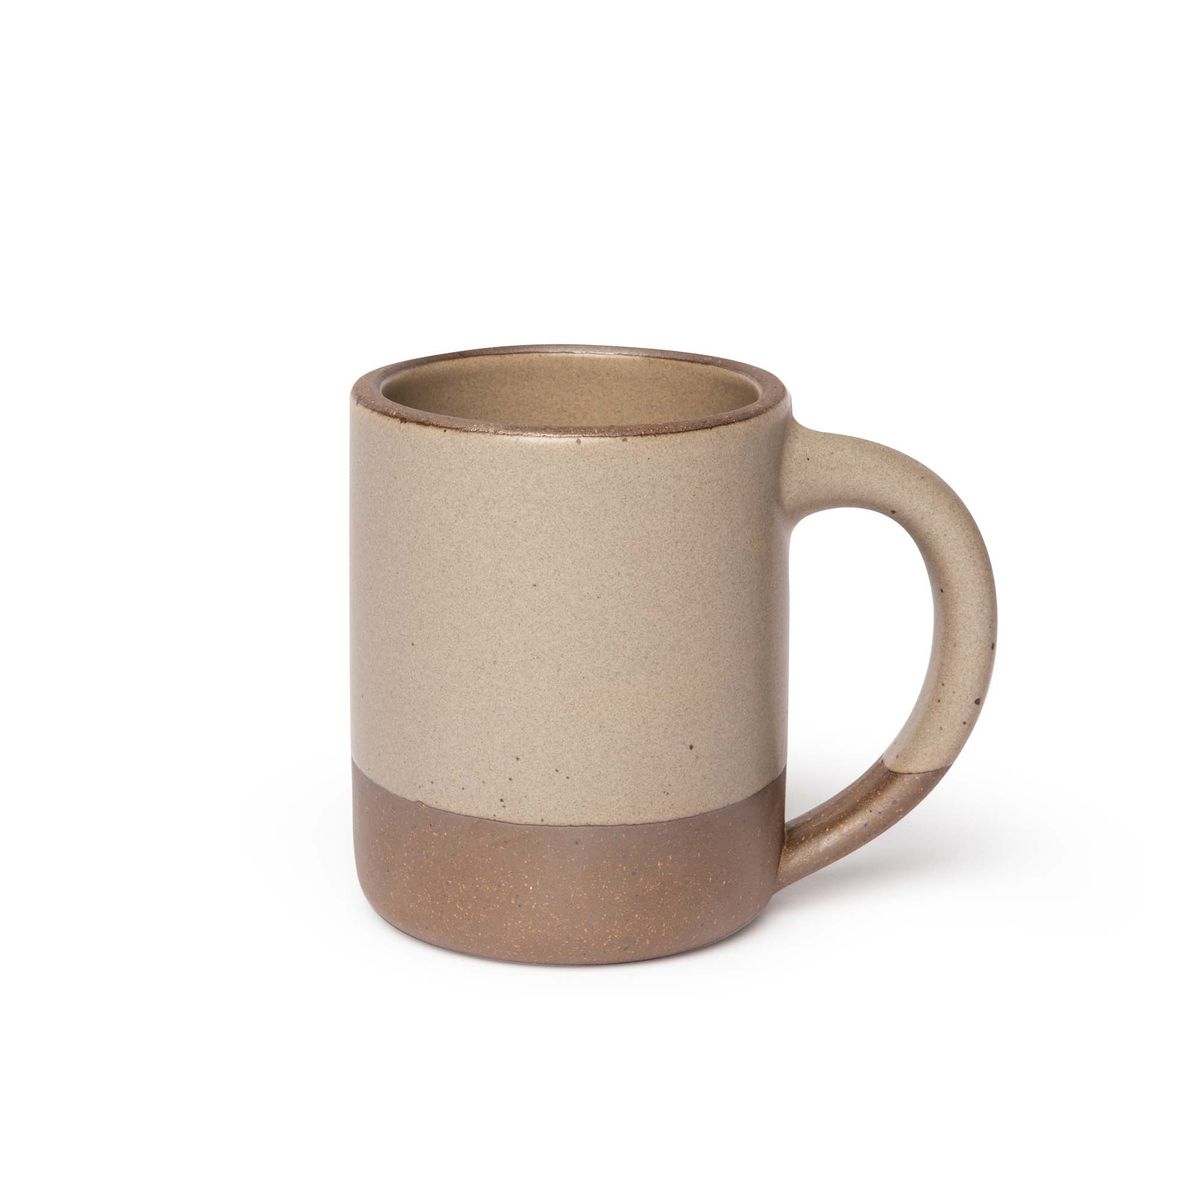 A big sized ceramic mug with handle in a warm pale brown glaze featuring iron speckles and unglazed rim and bottom base.